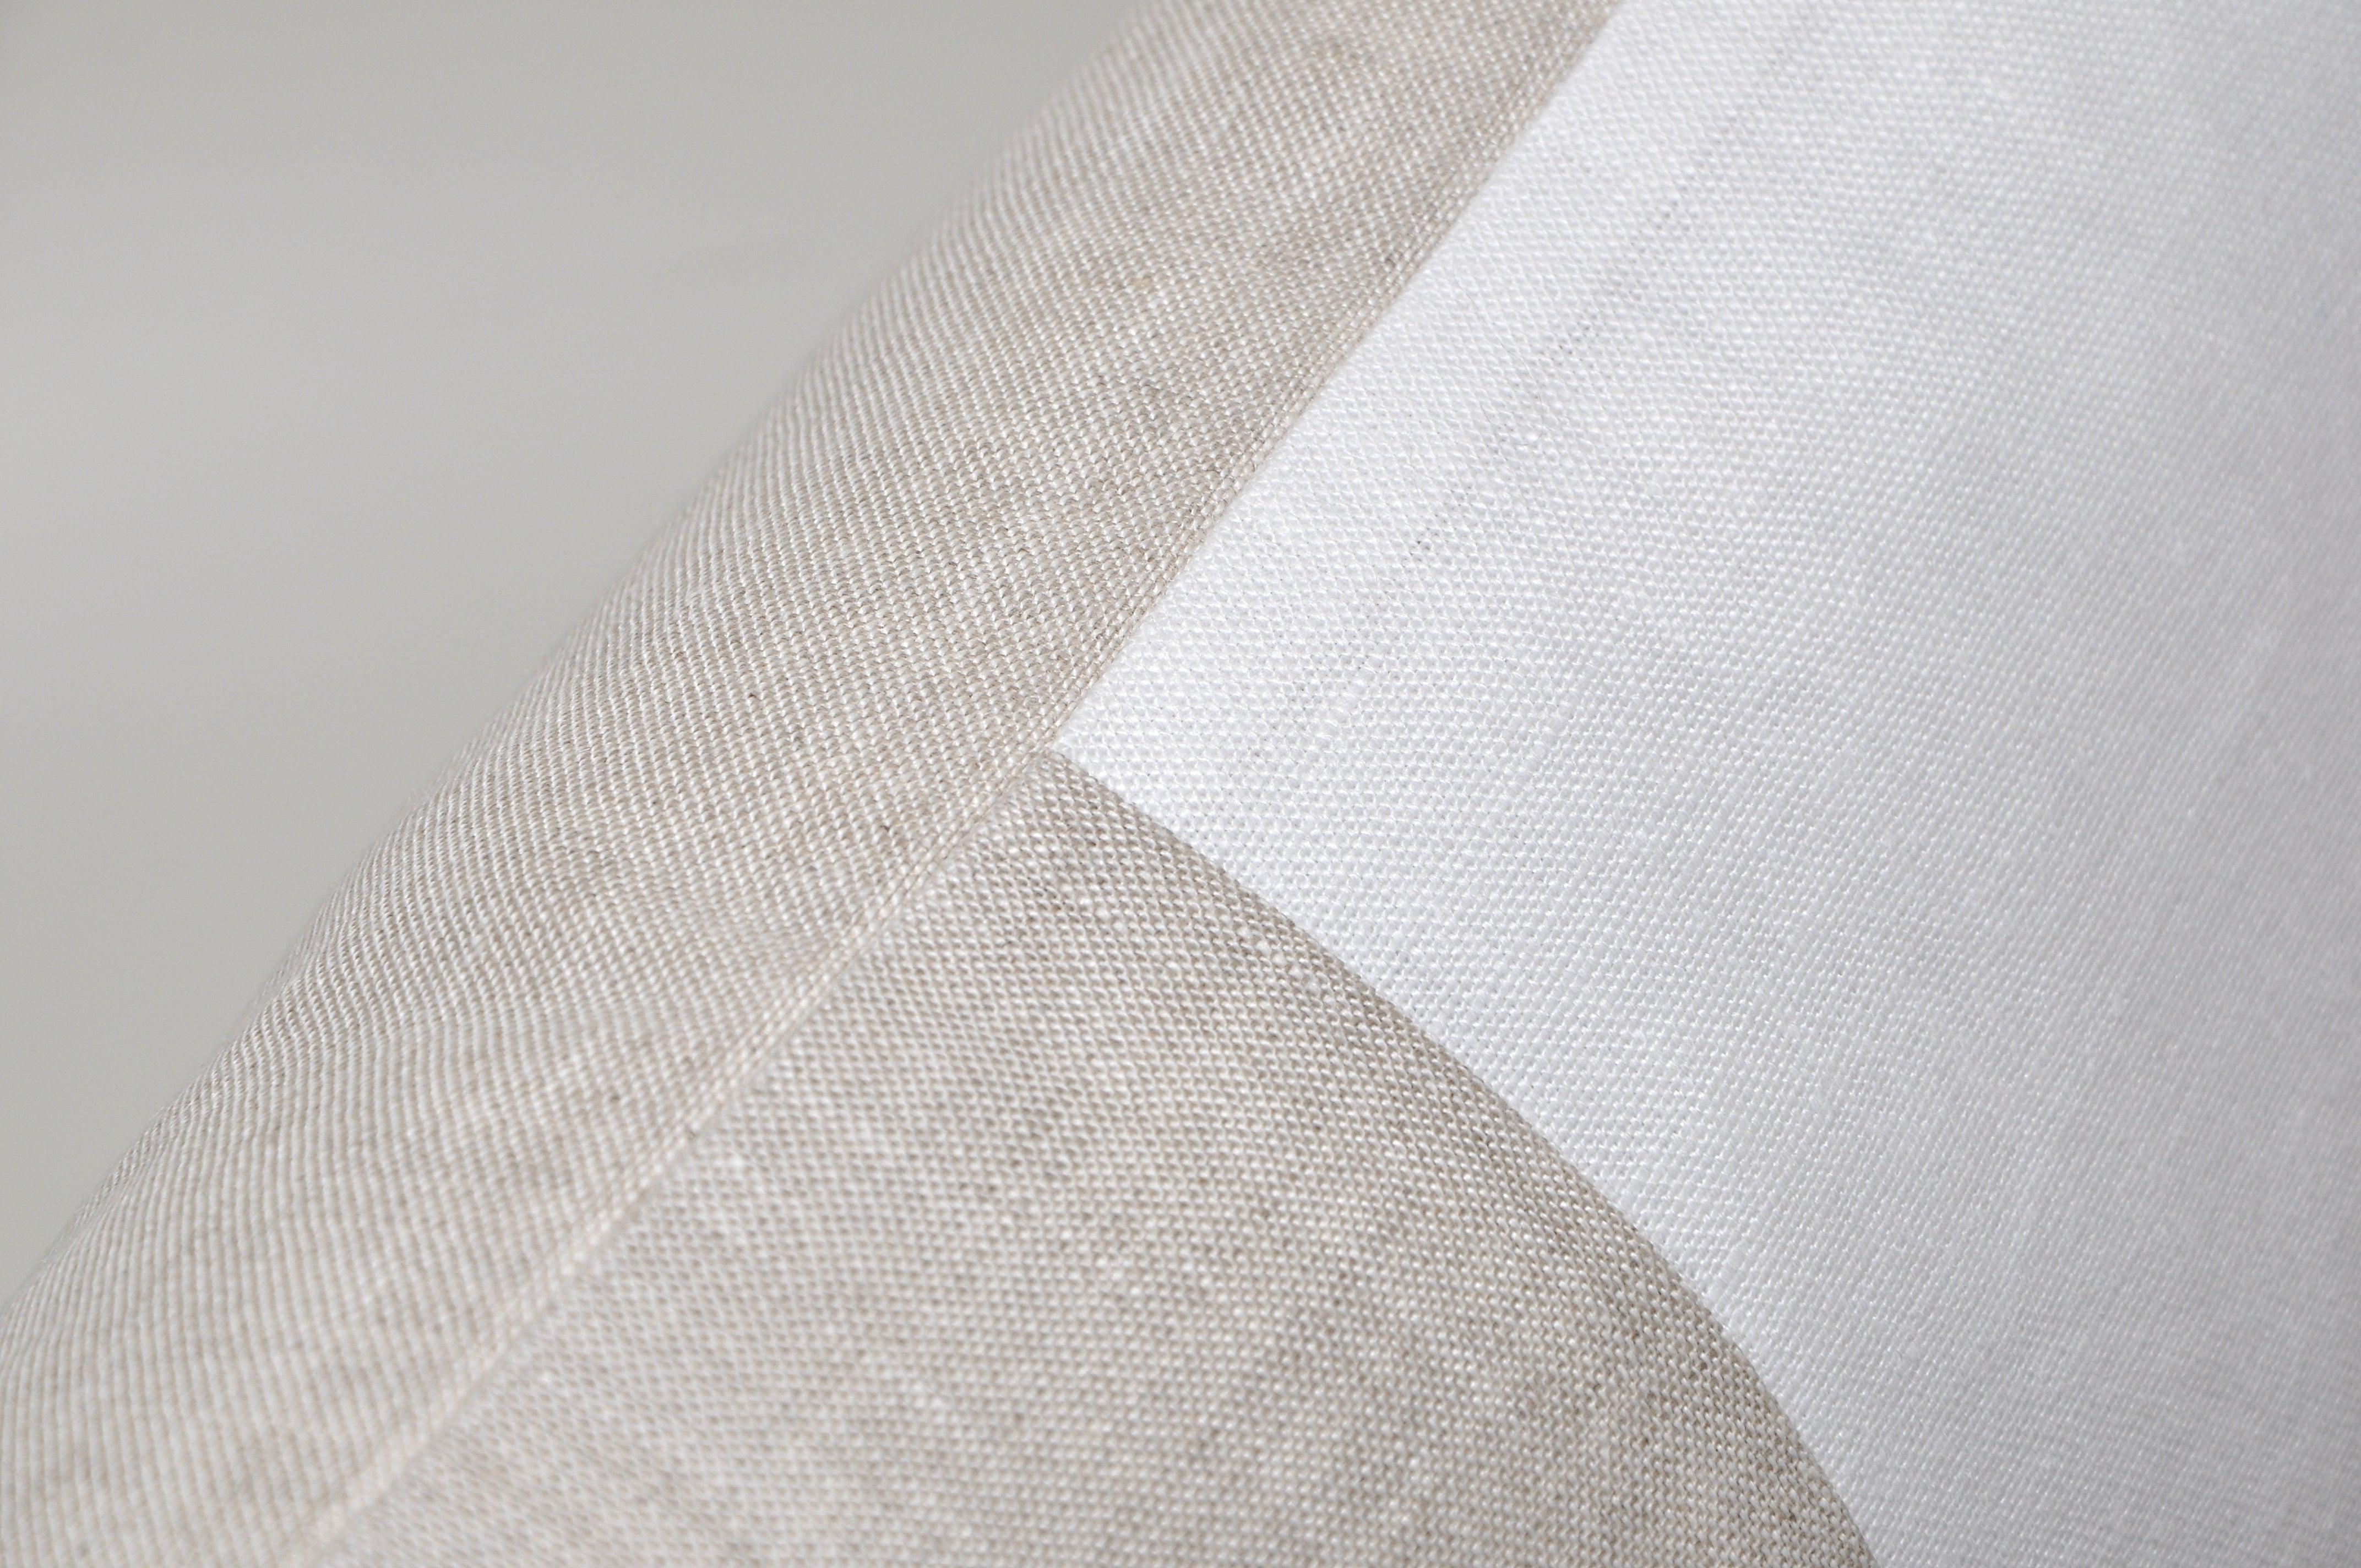 A pair of matching custom made luxury contemporary pillows (cushions) of 100 % pure Irish linen. A signature combination of Classic pristine white matched with traditional oatmeal. The oatmeal is a beautiful mottled color which is the mixture of a